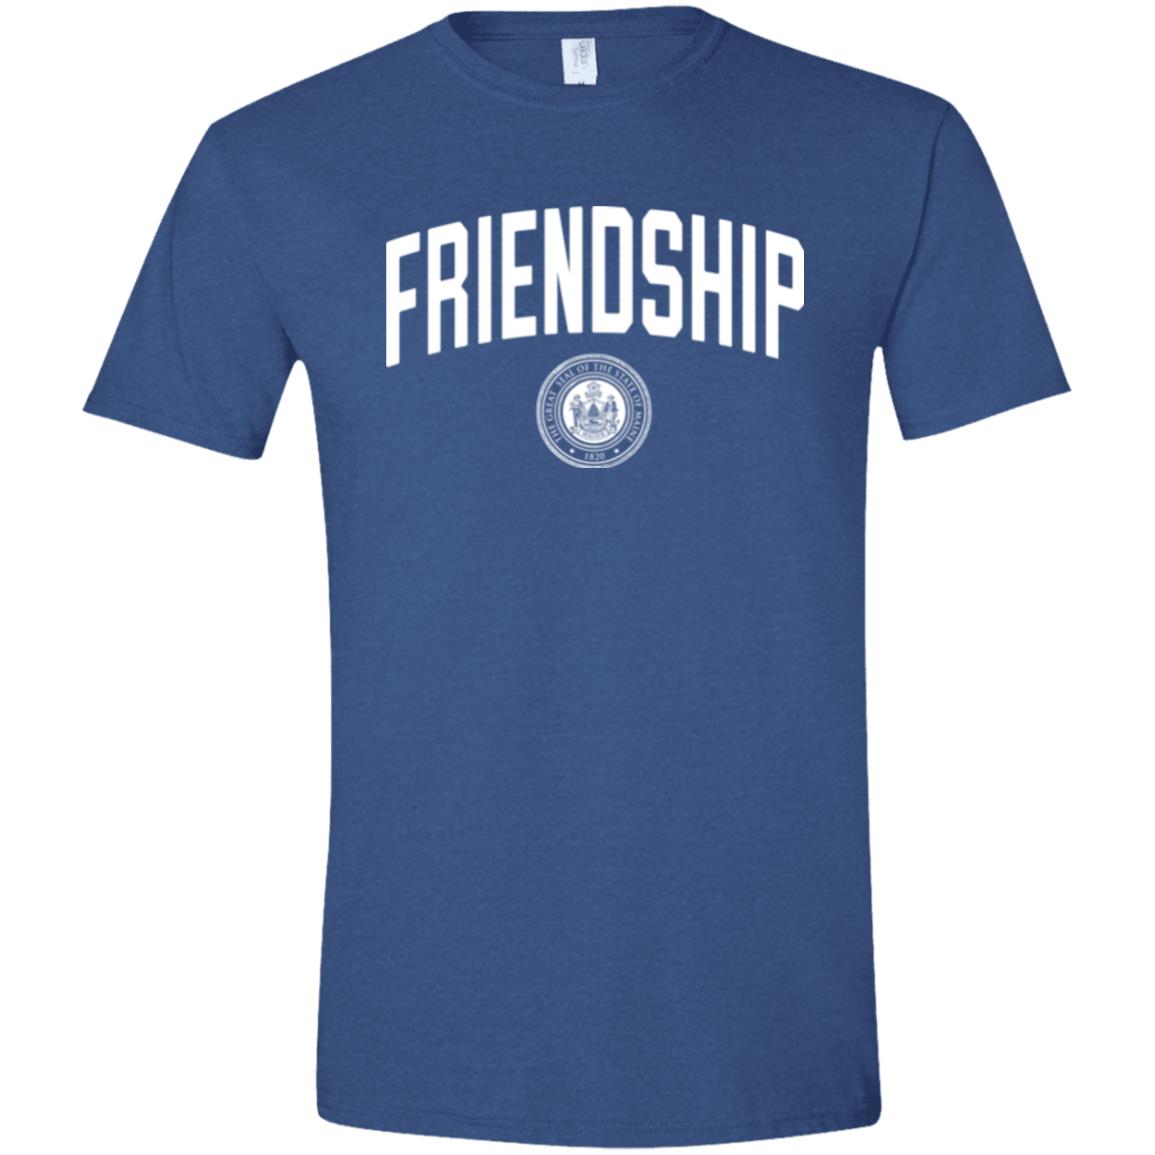 Friendship Maine T-Shirt - Comfy Soft, Semi-Fitted Tee (Unisex) - 207 Threads